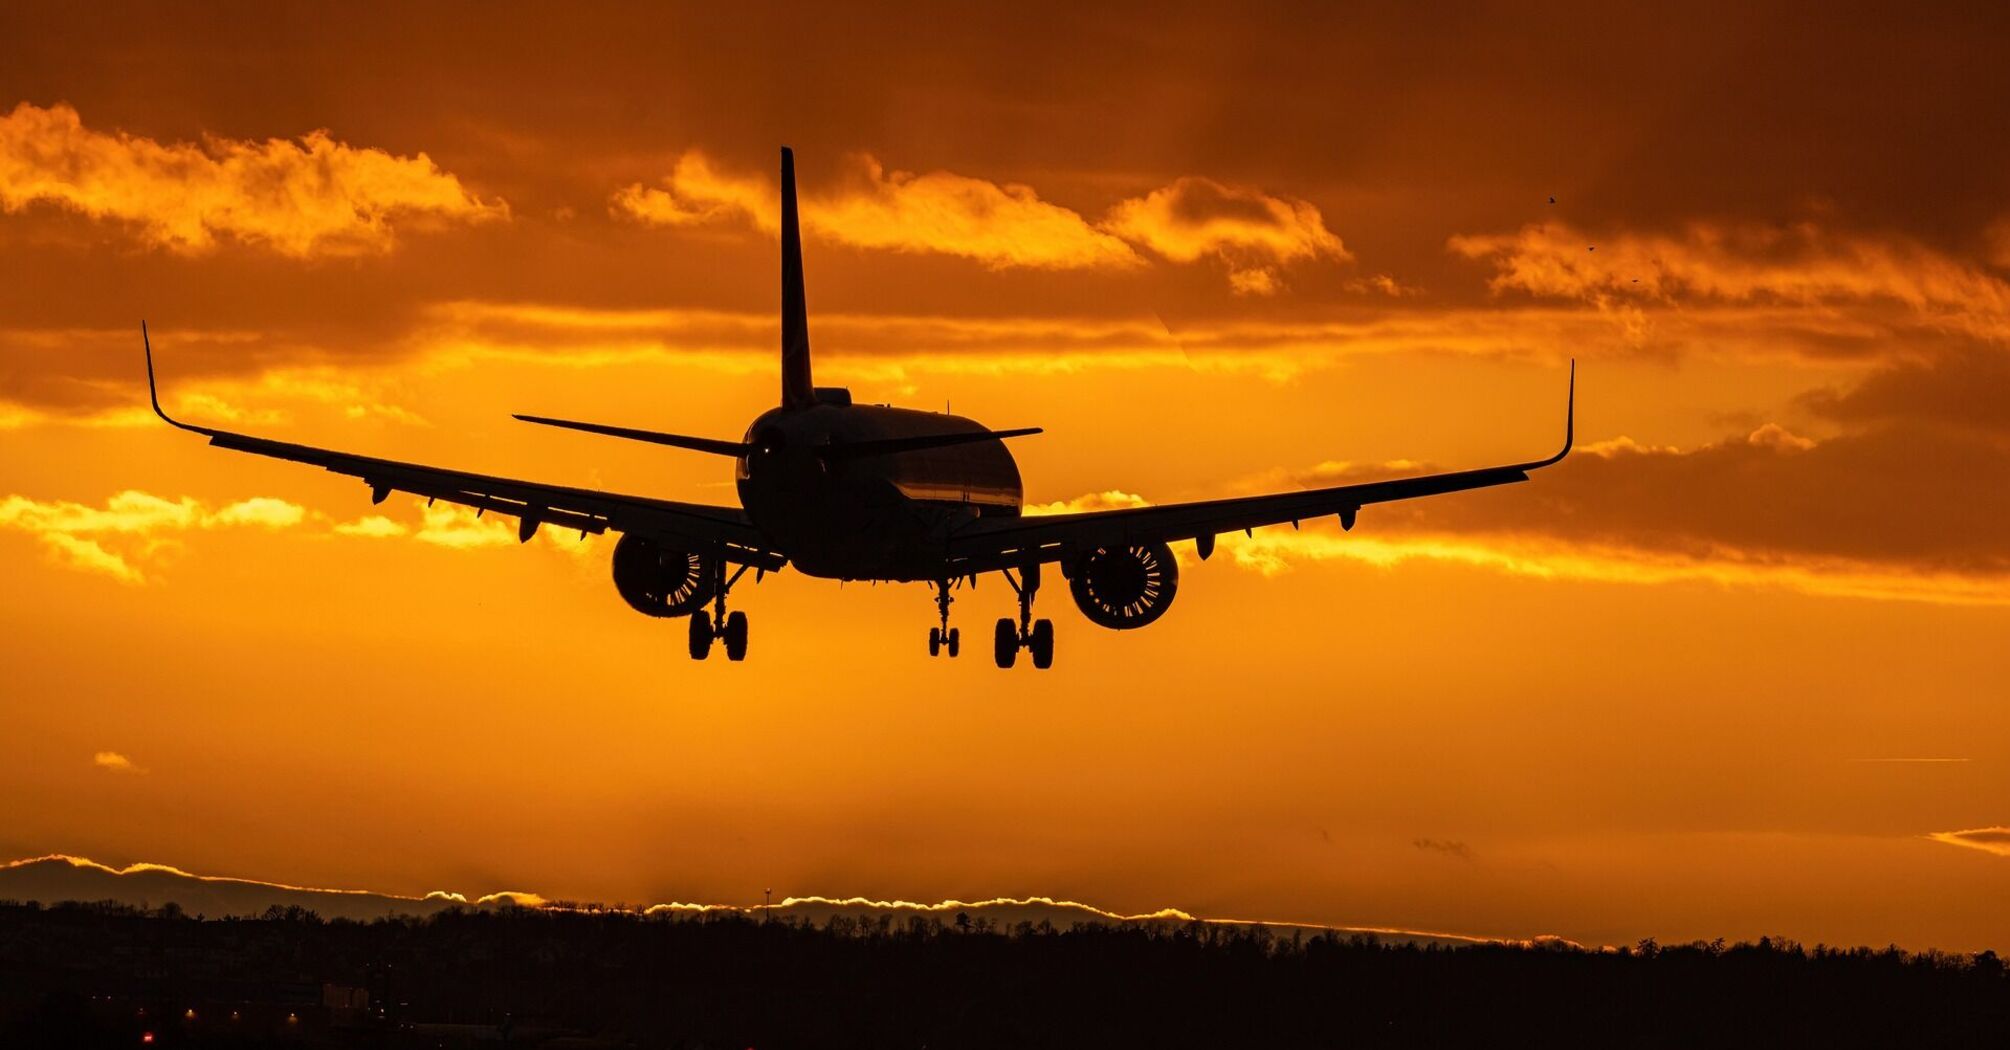 A silhouette of an airplane landing against a vibrant orange sunset sky